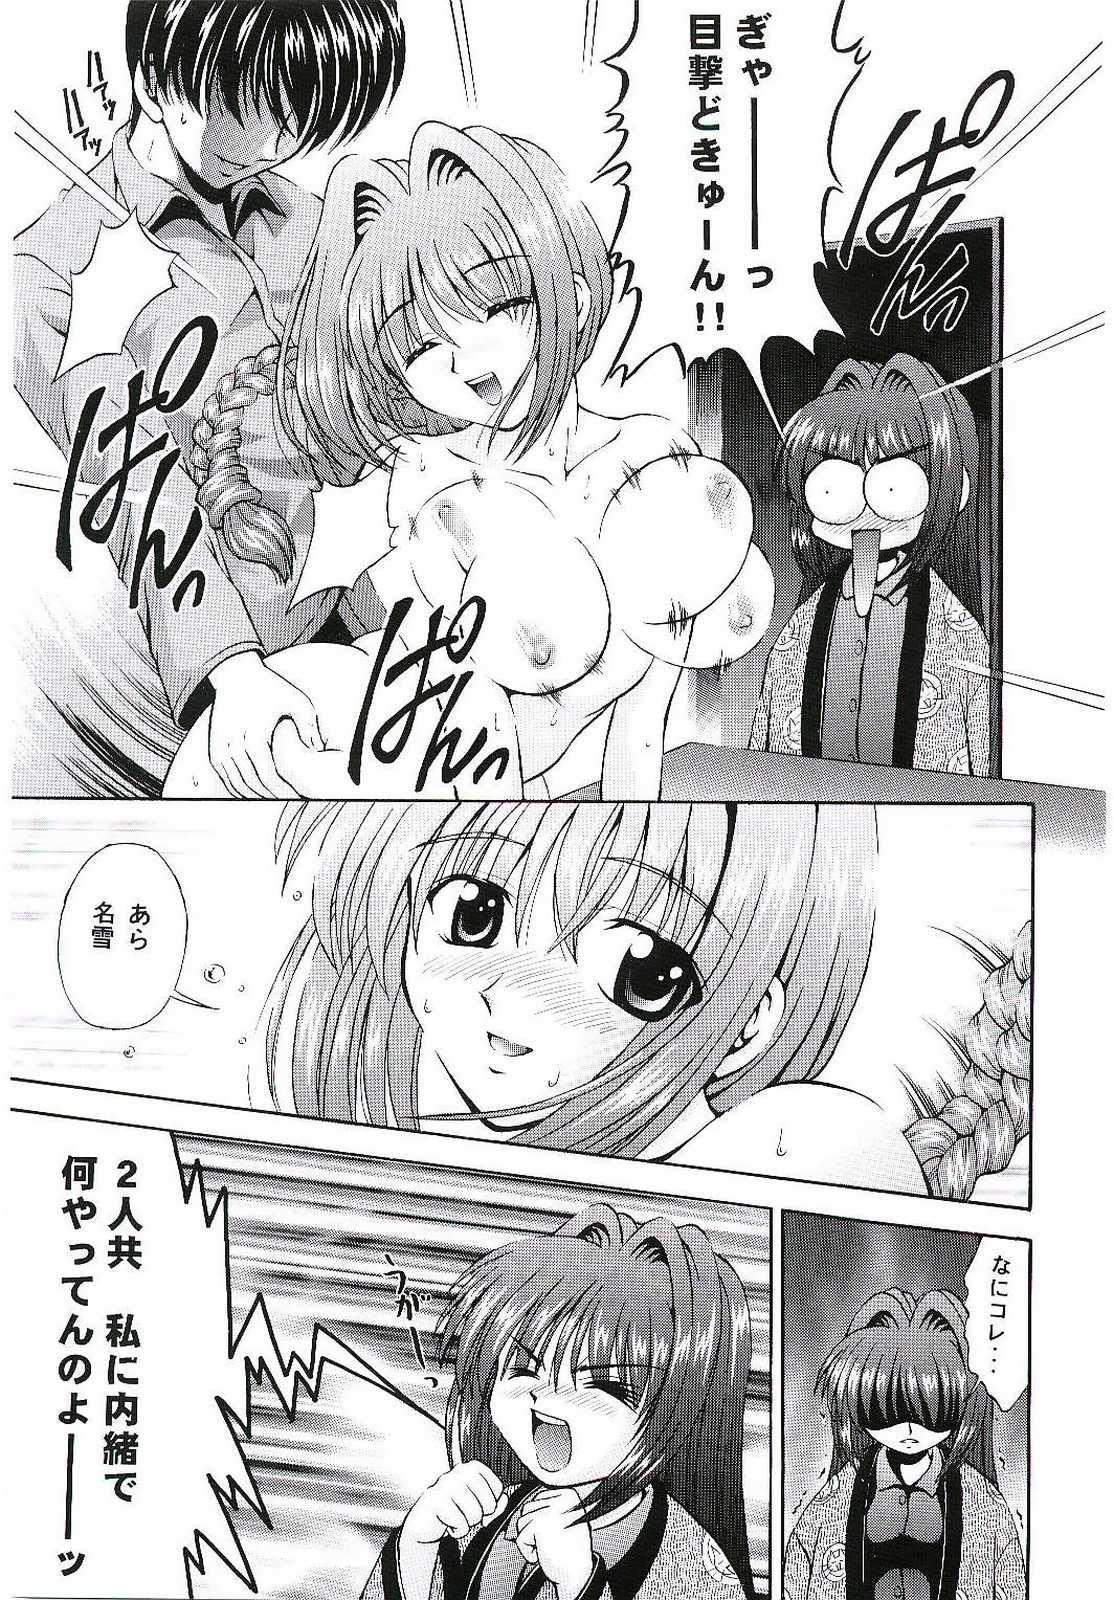 Sex Pussy Six Piece 1 - Kanon Small - Page 10